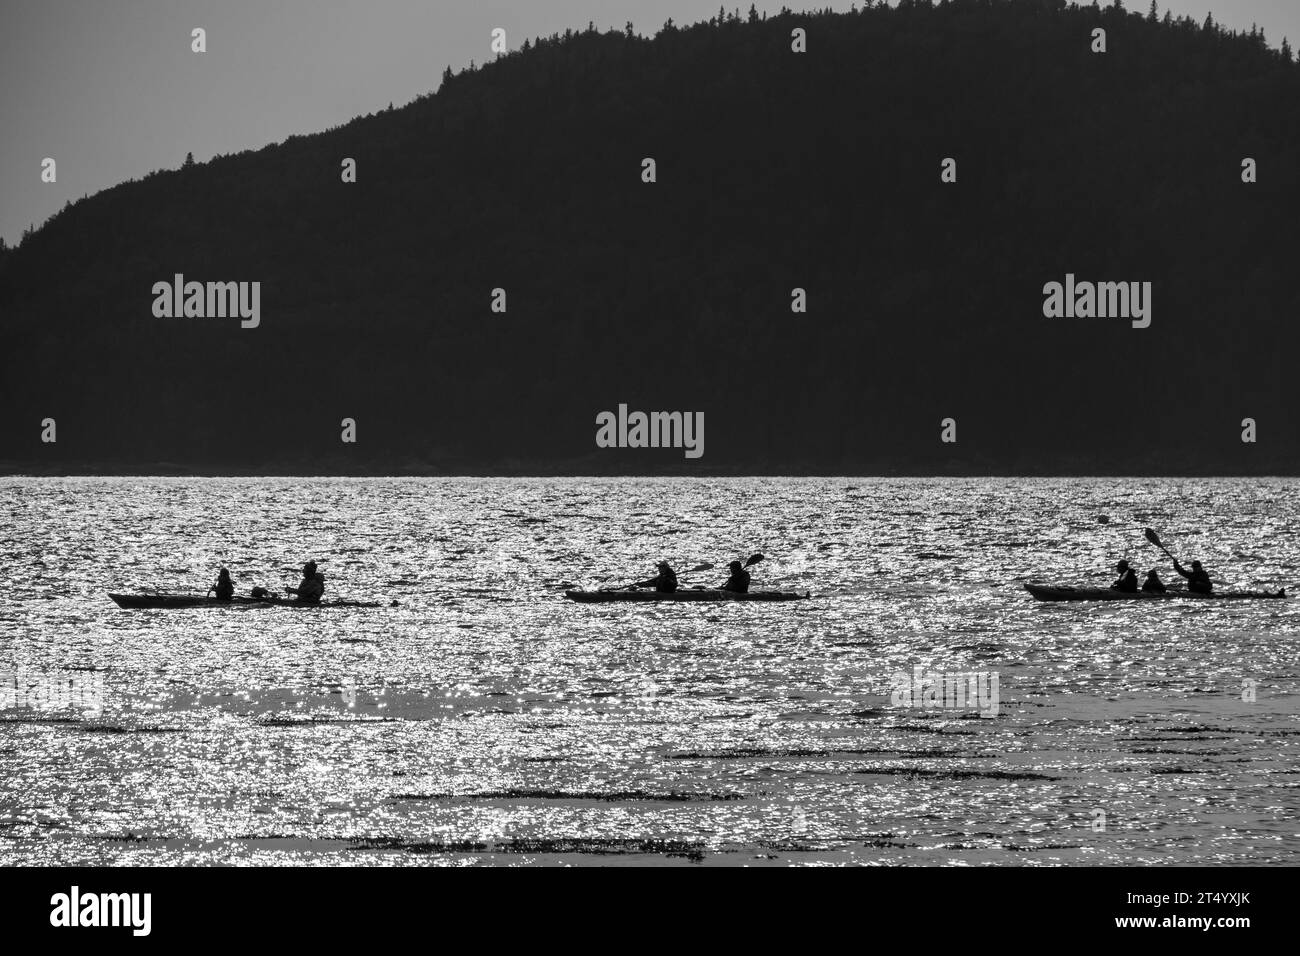 Three kayaks on the St. Lawrence River near the village of Bic, province of Quebec, Canada. Black and white. Stock Photo